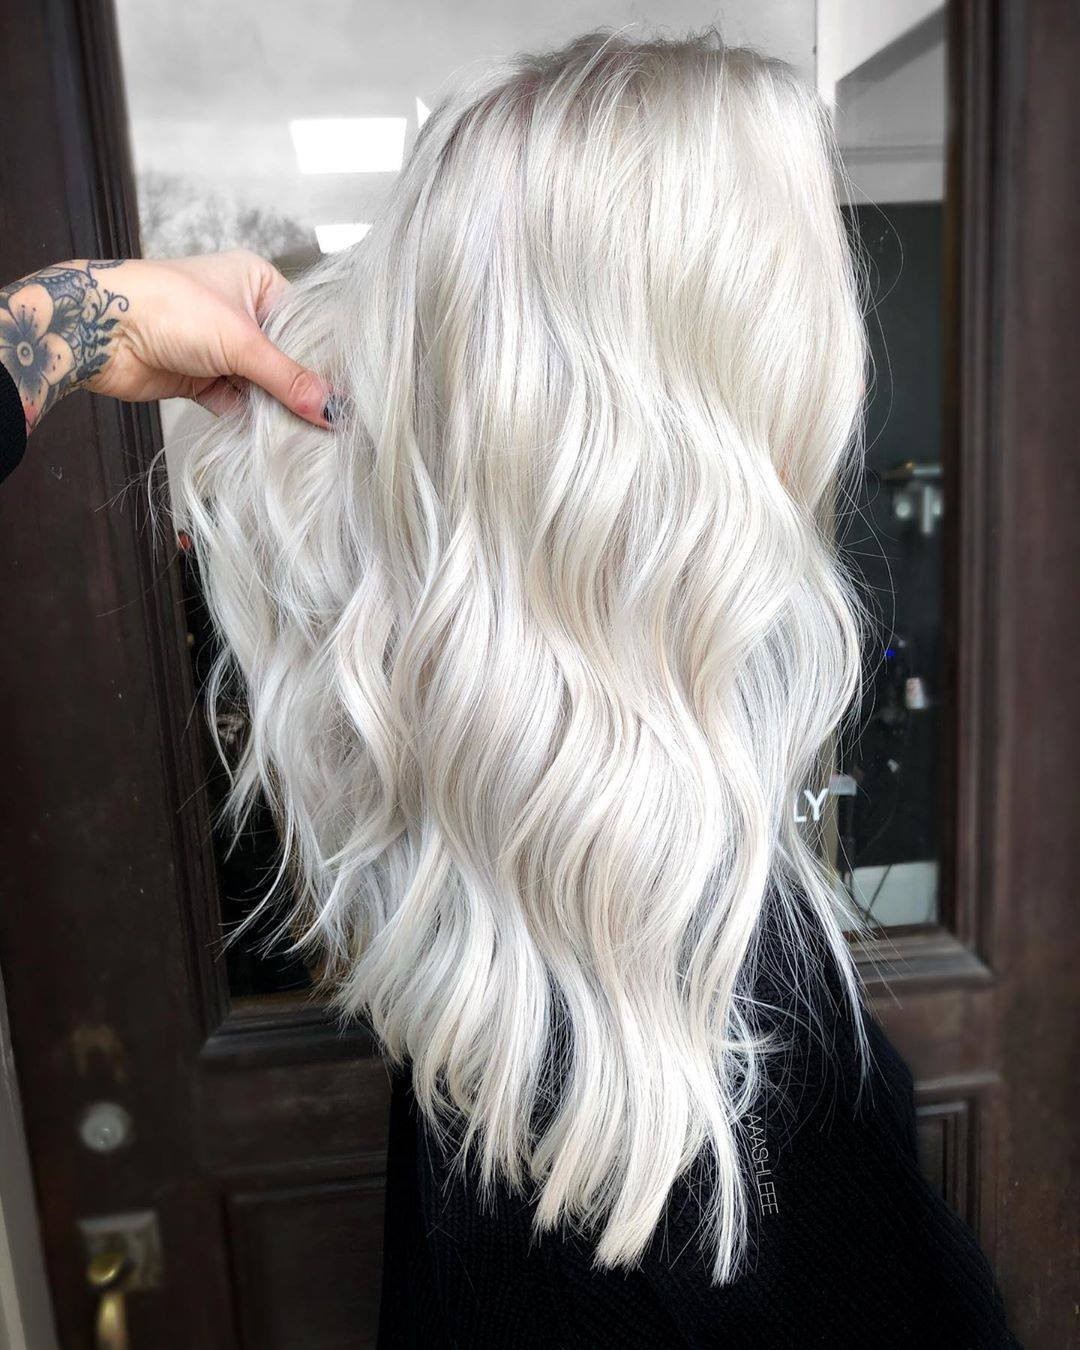 Matrix - SNOW WHITE ❄️ We can’t keep our eyes off this platinum masterpiece by @aaashleee She kept her client’s hair free from yellow undertones with our #SoSilver Triple Power Mask. Our pigmented for...